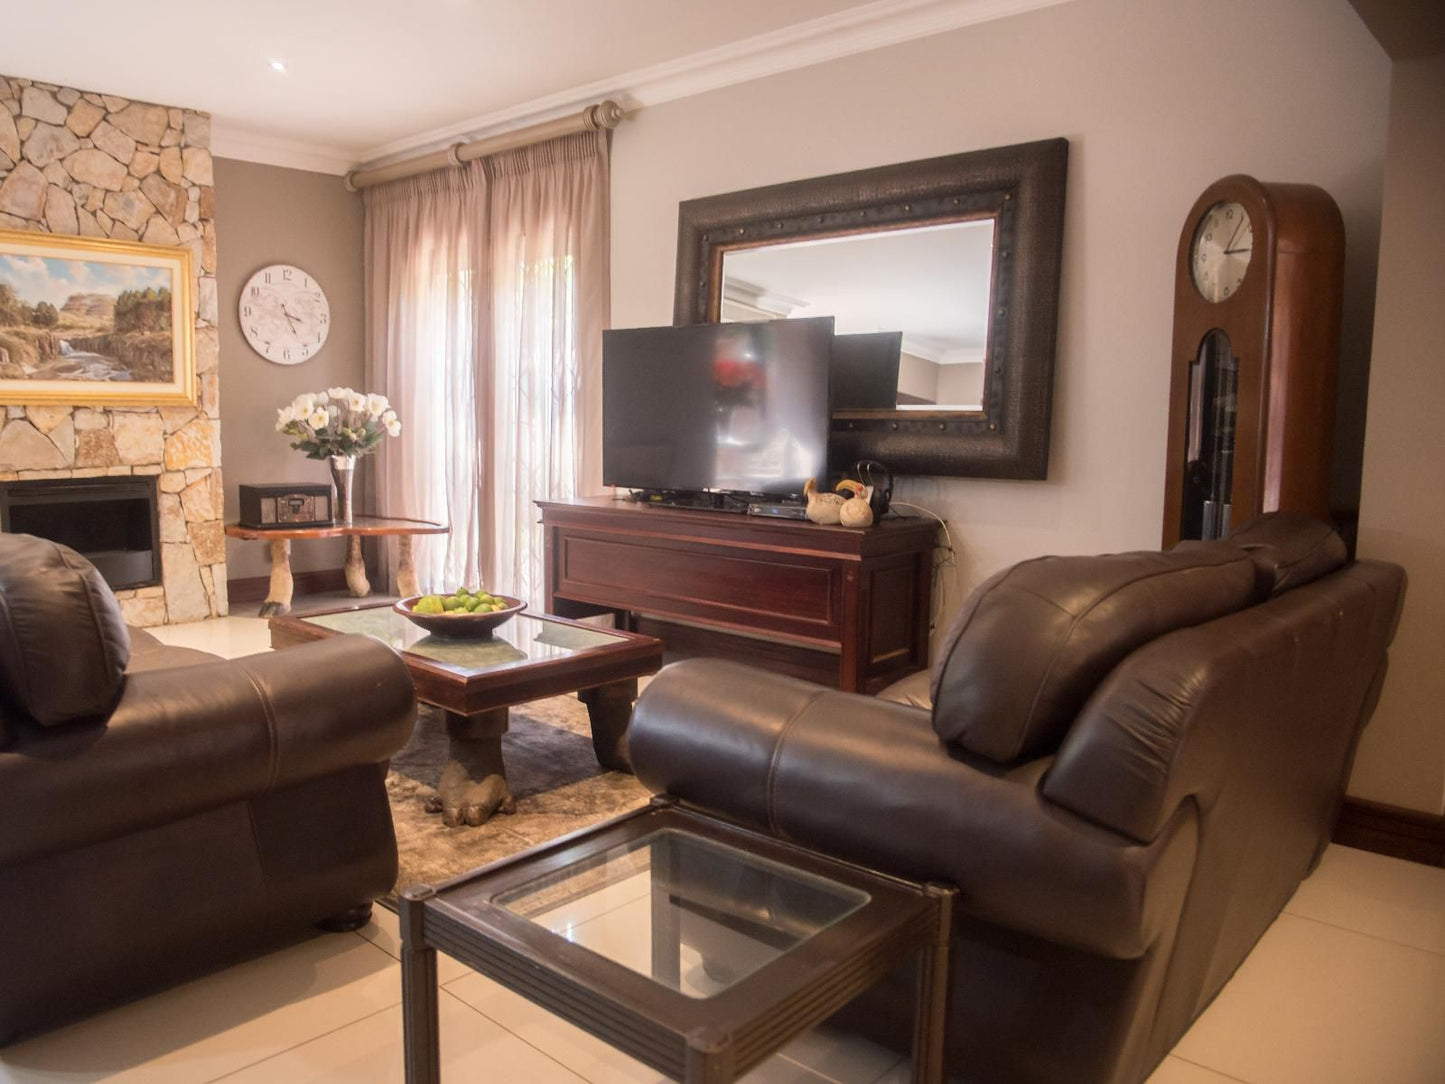 Potch Manor Die Bult Potchefstroom North West Province South Africa Living Room